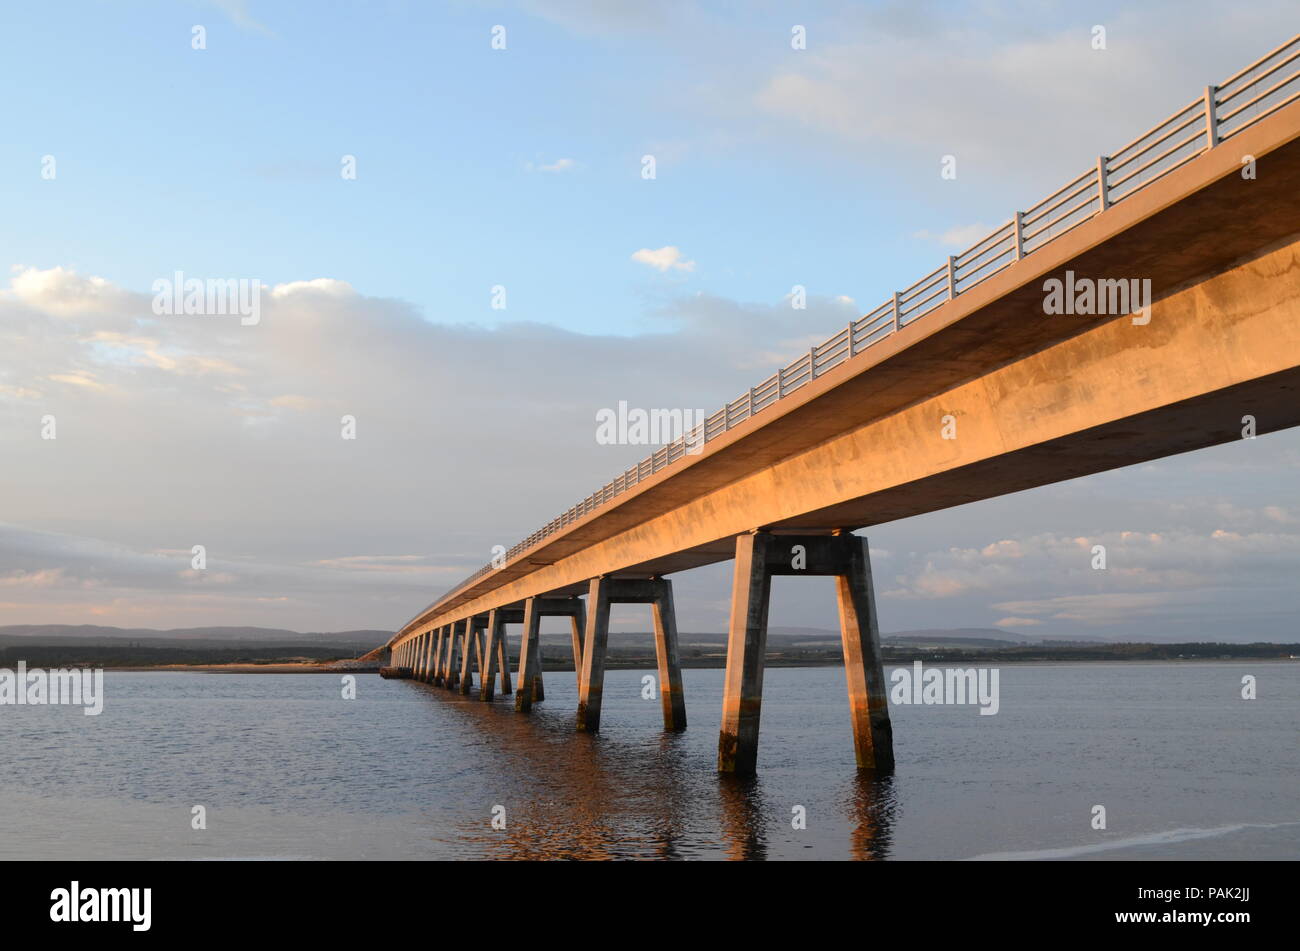 The Dornoch Firth Bridge, carrying the A9 trunk road from Inverness to Wick over the Dornoch Firth, Scotland, UK. Stock Photo